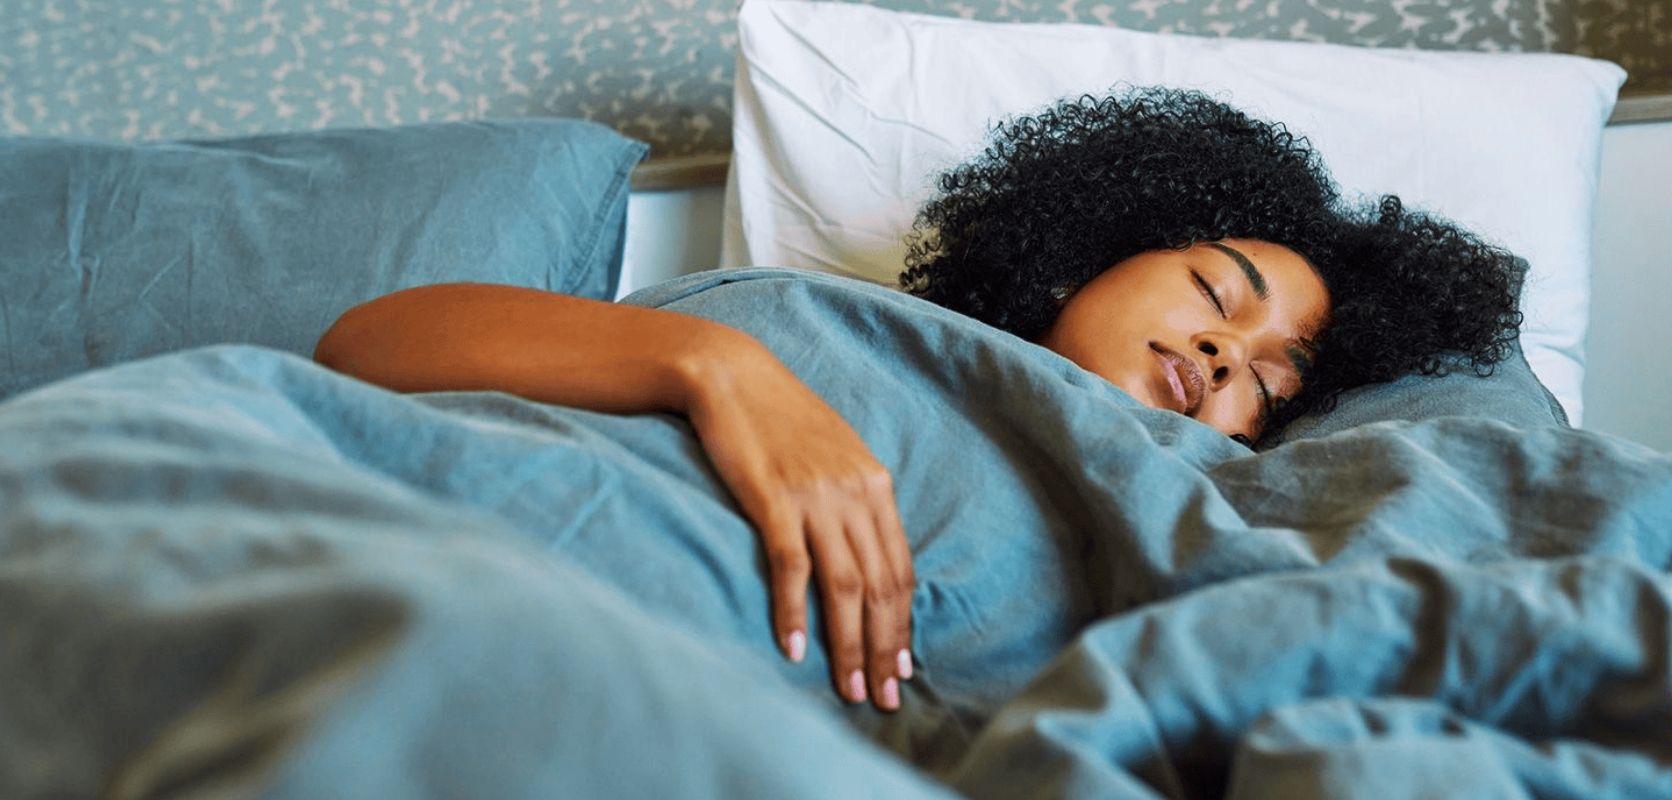 Cannabidiol is known for its relaxing and calming effects on the nervous system. This suggests it may effectively promote sleep quality and quantity in people with insomnia.